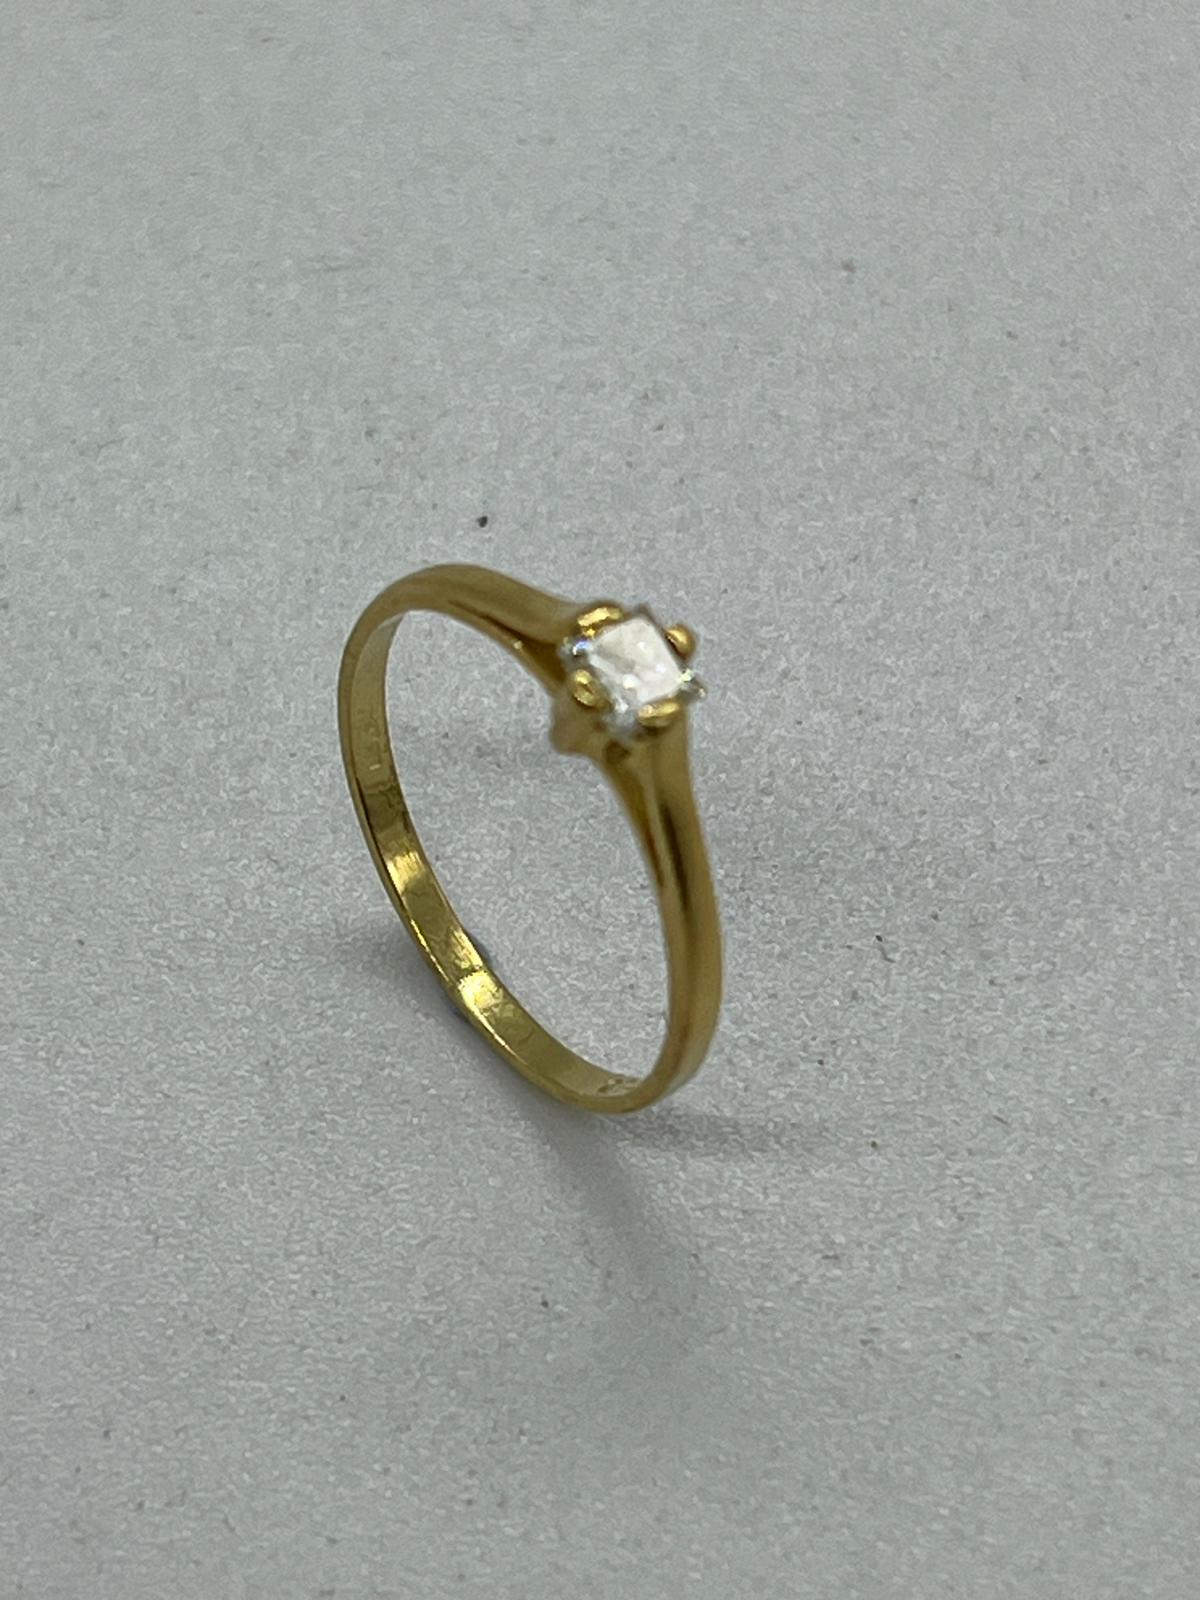 An 18ct diamond ring, yellow gold marked 750 (Approximate Total Weight 2g) Size N - Image 4 of 7